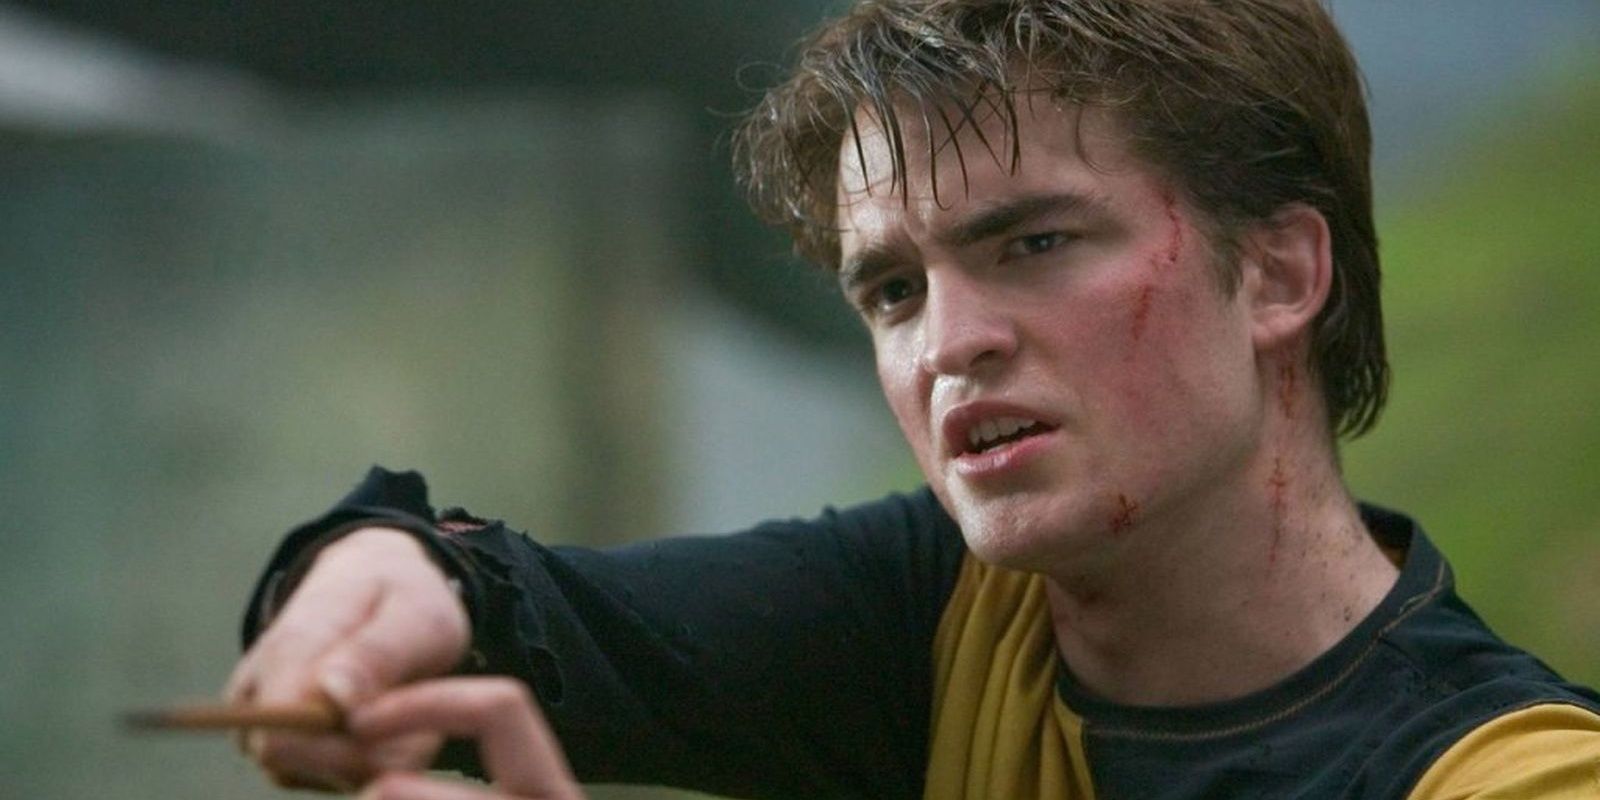 Cedric Diggory (Robert Pattinson) holds up his wand with cuts on his face in Harry Potter and the Goblet of Fire